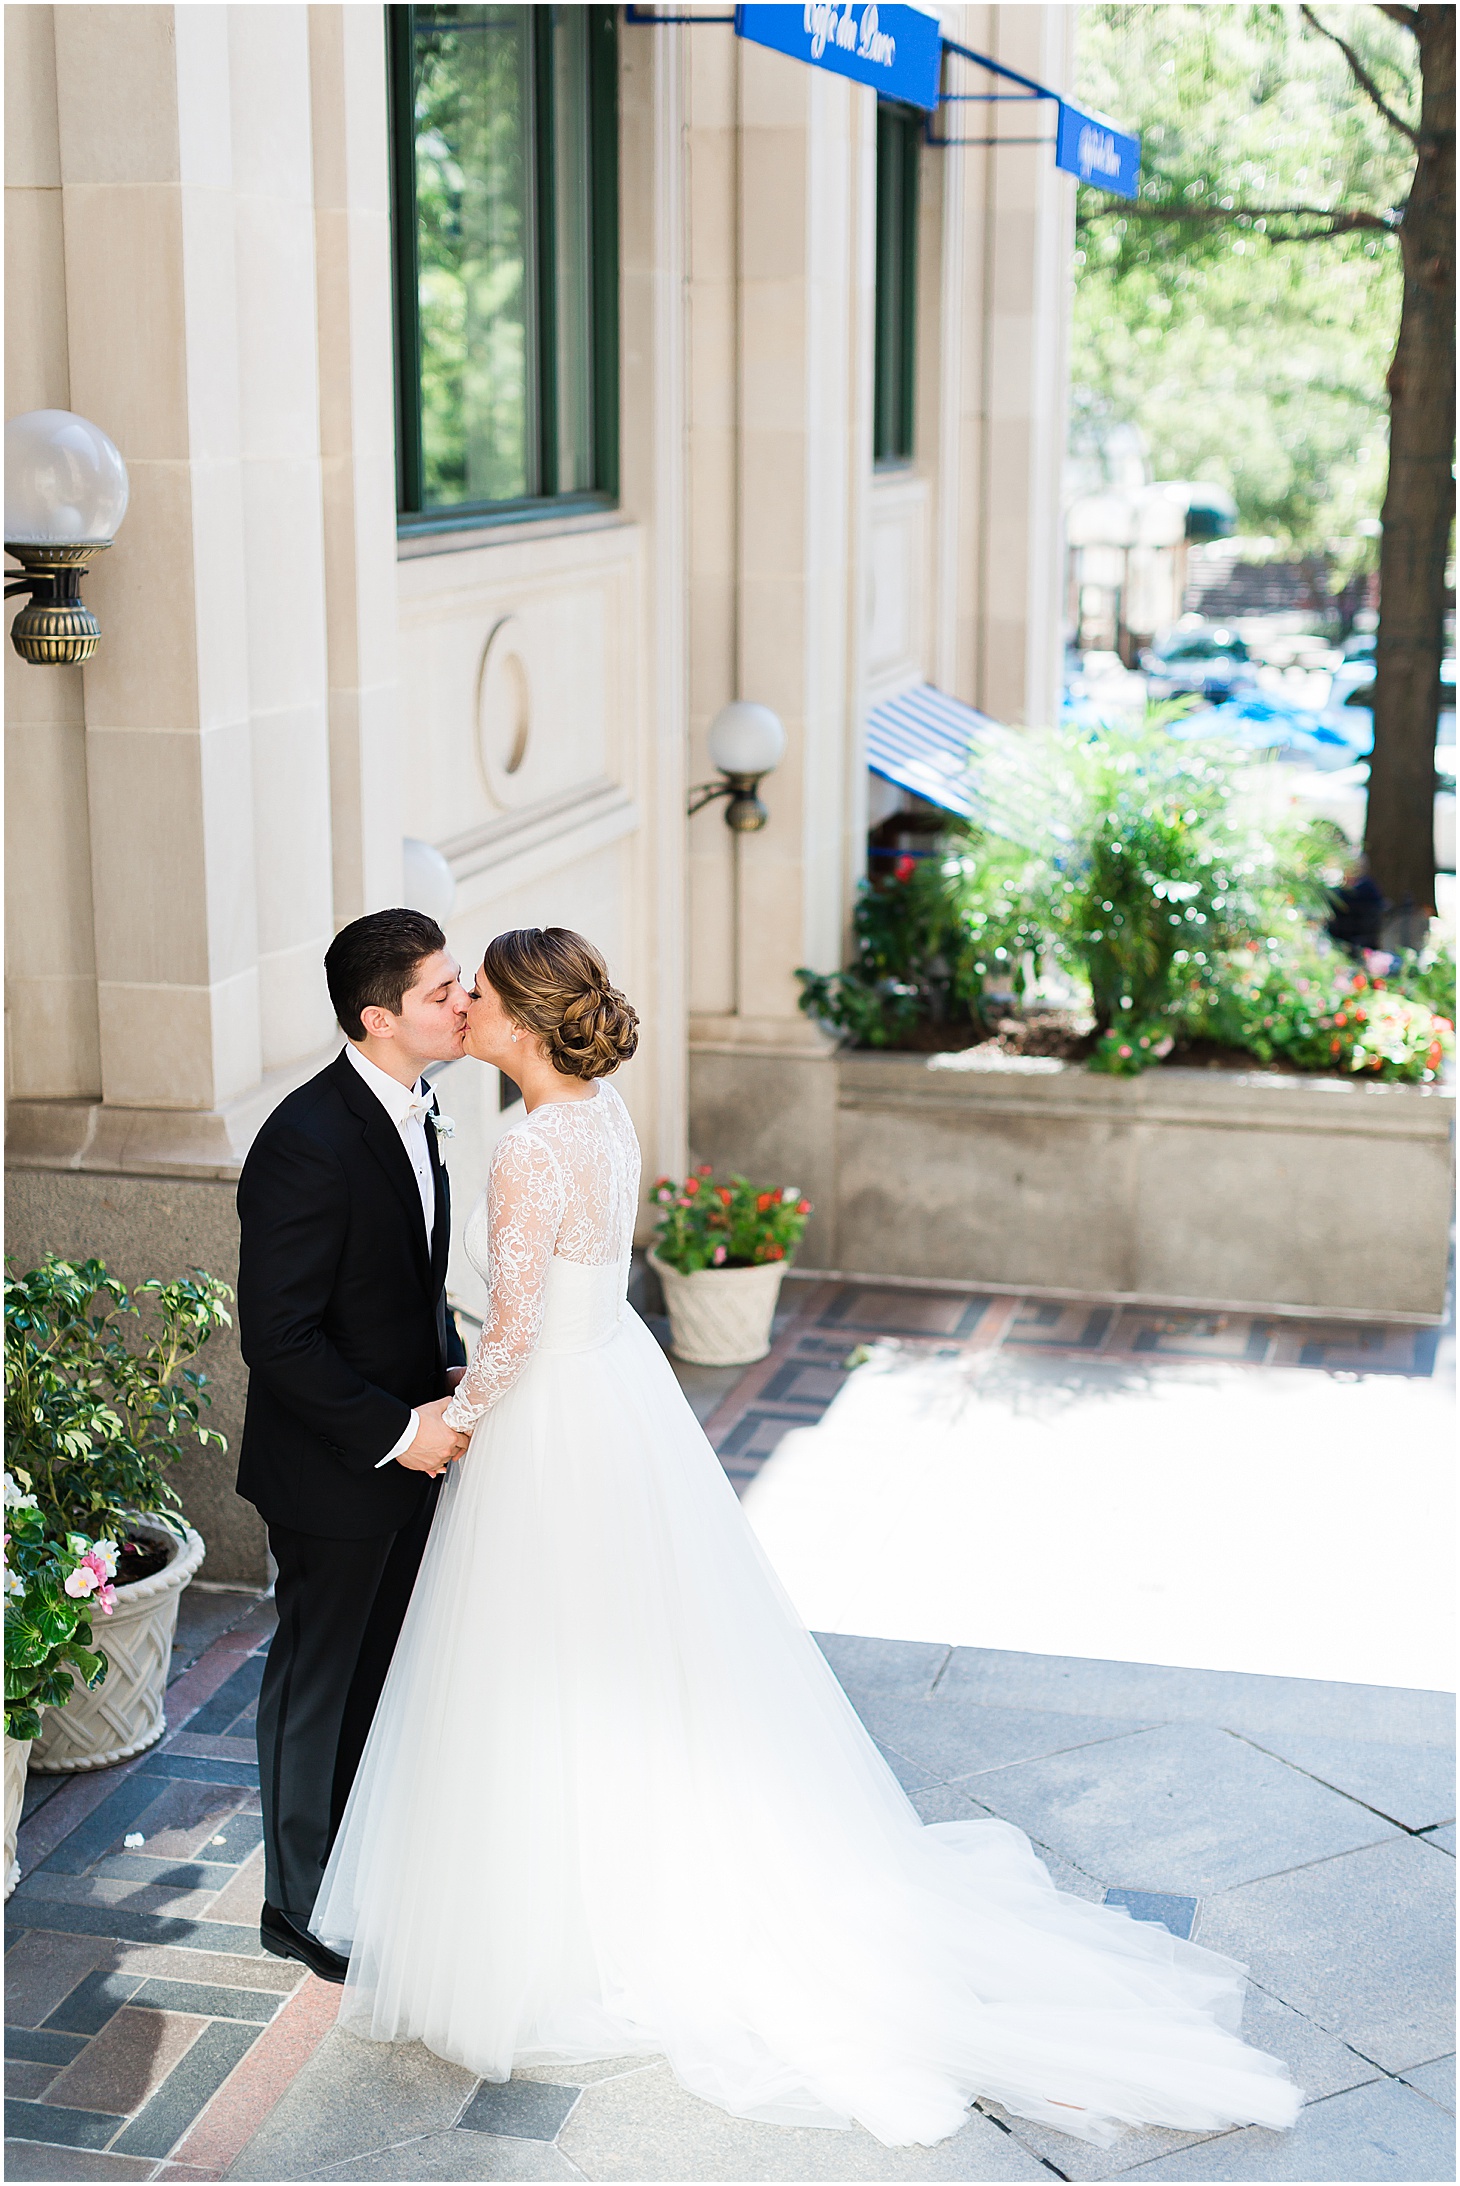 First Look at Willard InterContinental Hotel, Photographed by Sarah Bradshaw Photography, Romantic Candlelight Italian Wedding at Andrew Mellon Auditorium